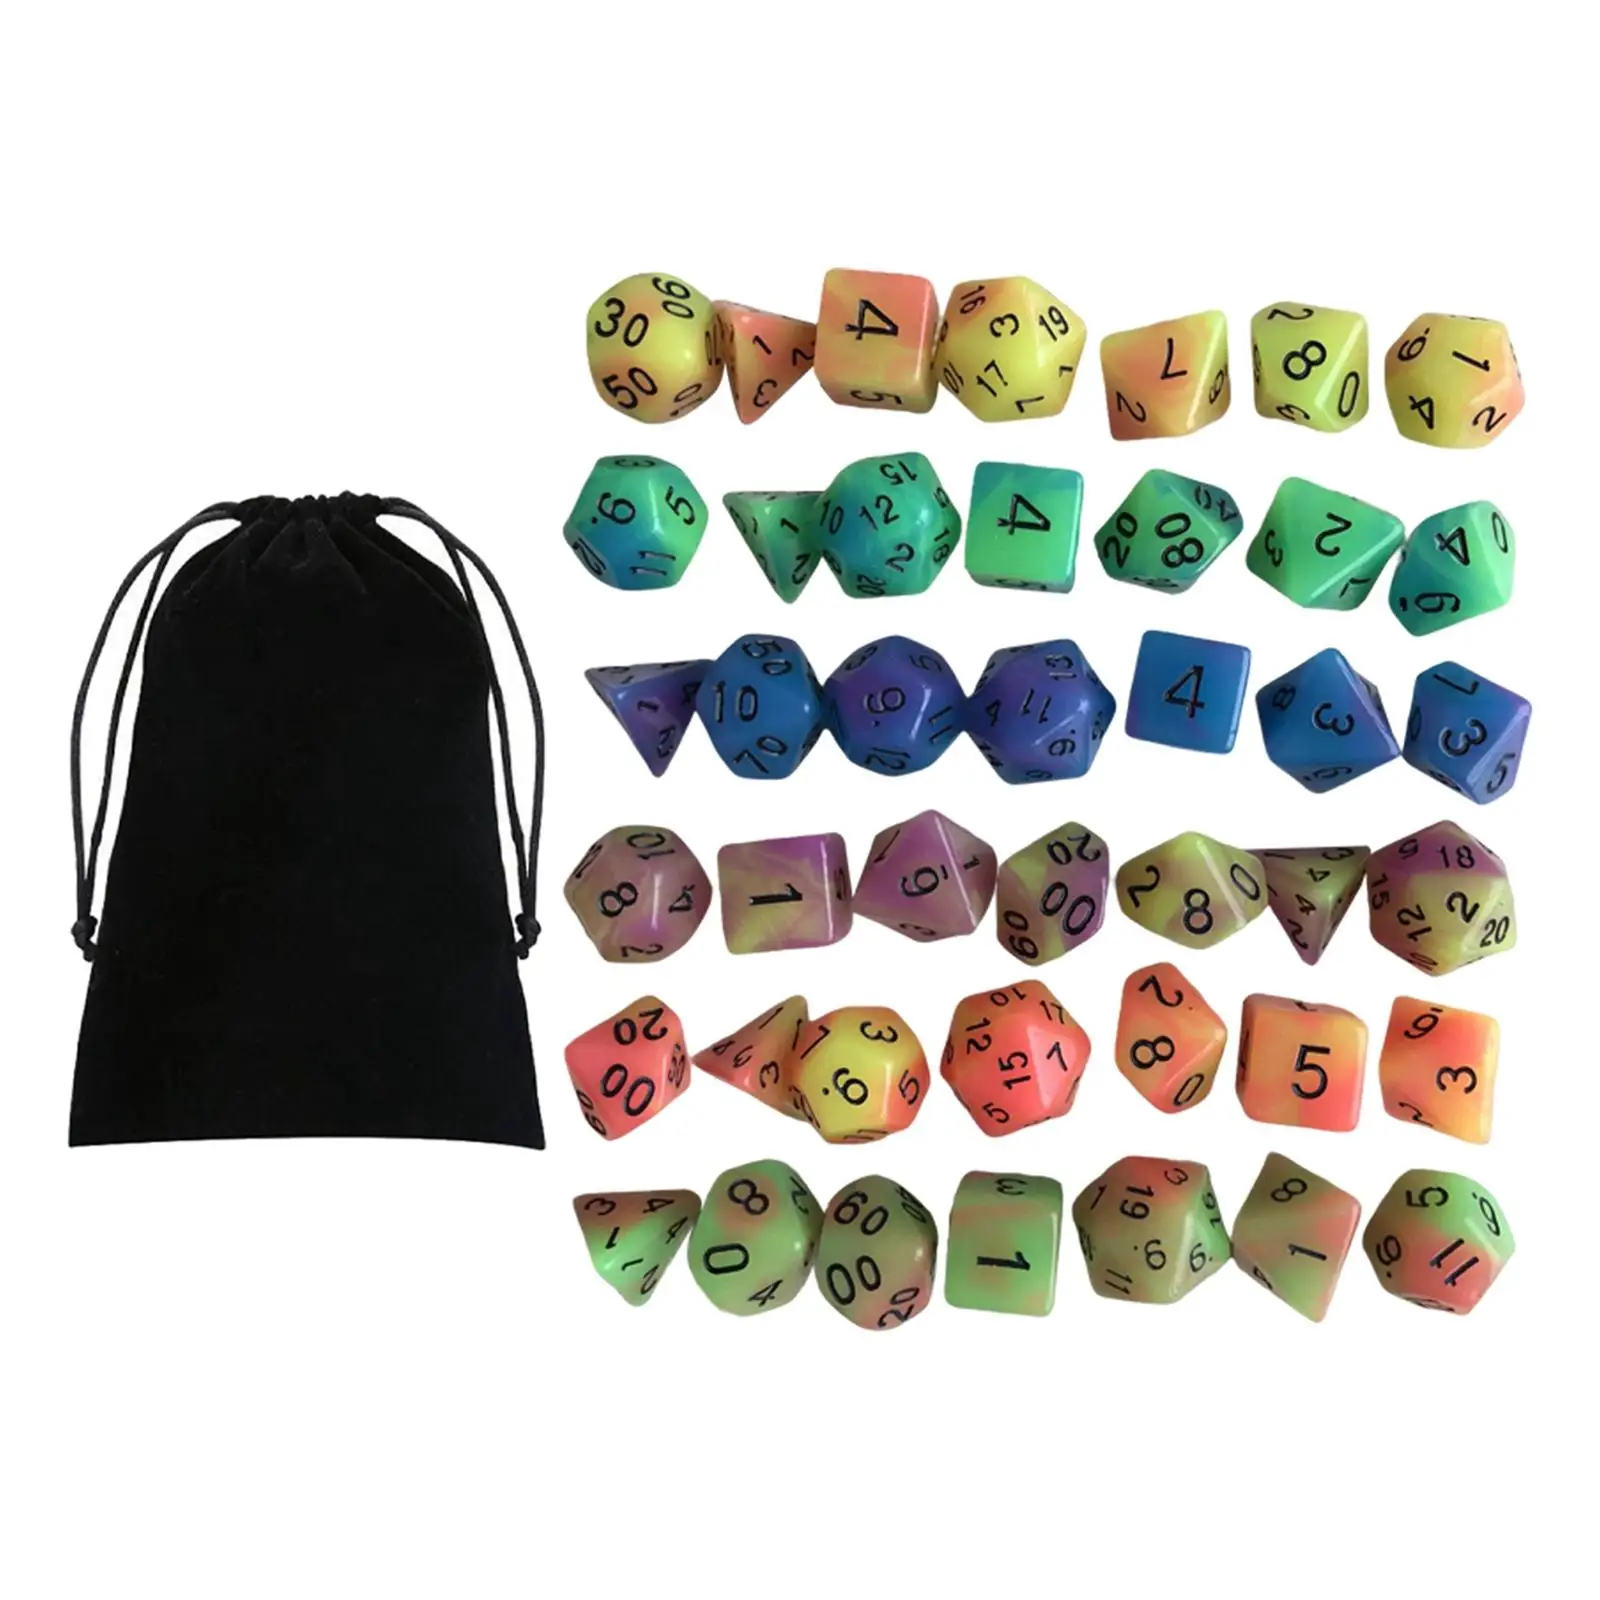 Acrylic Luminous RPG Dices Set D8 D10 D12 D20 Party Toys Glowing Polyhedral Dices Set for DND Math Teaching